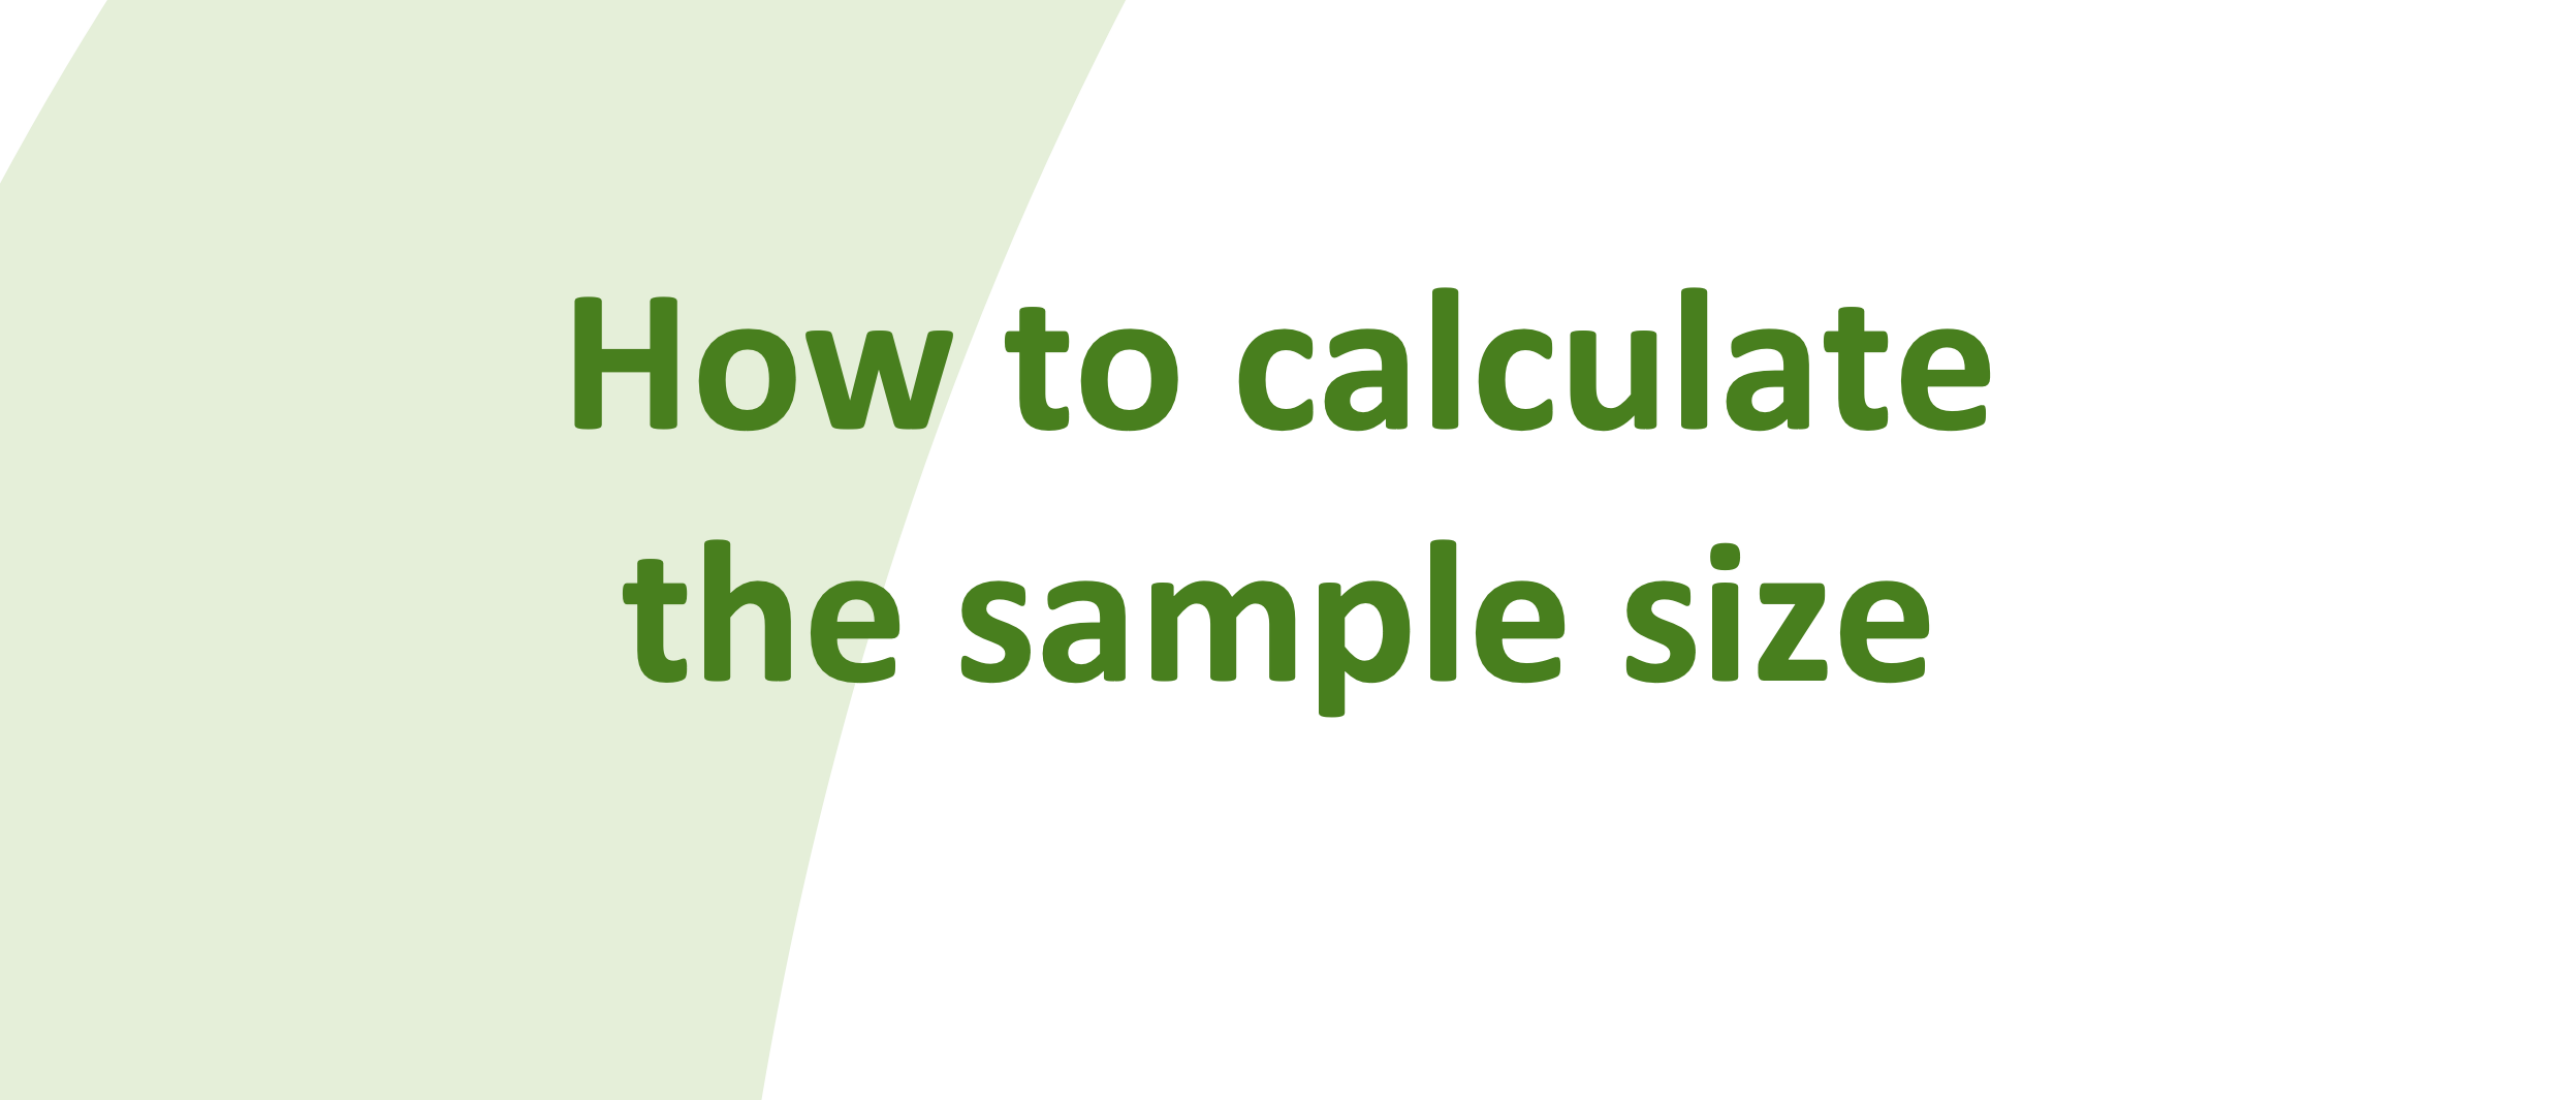 How to calculate the sample size